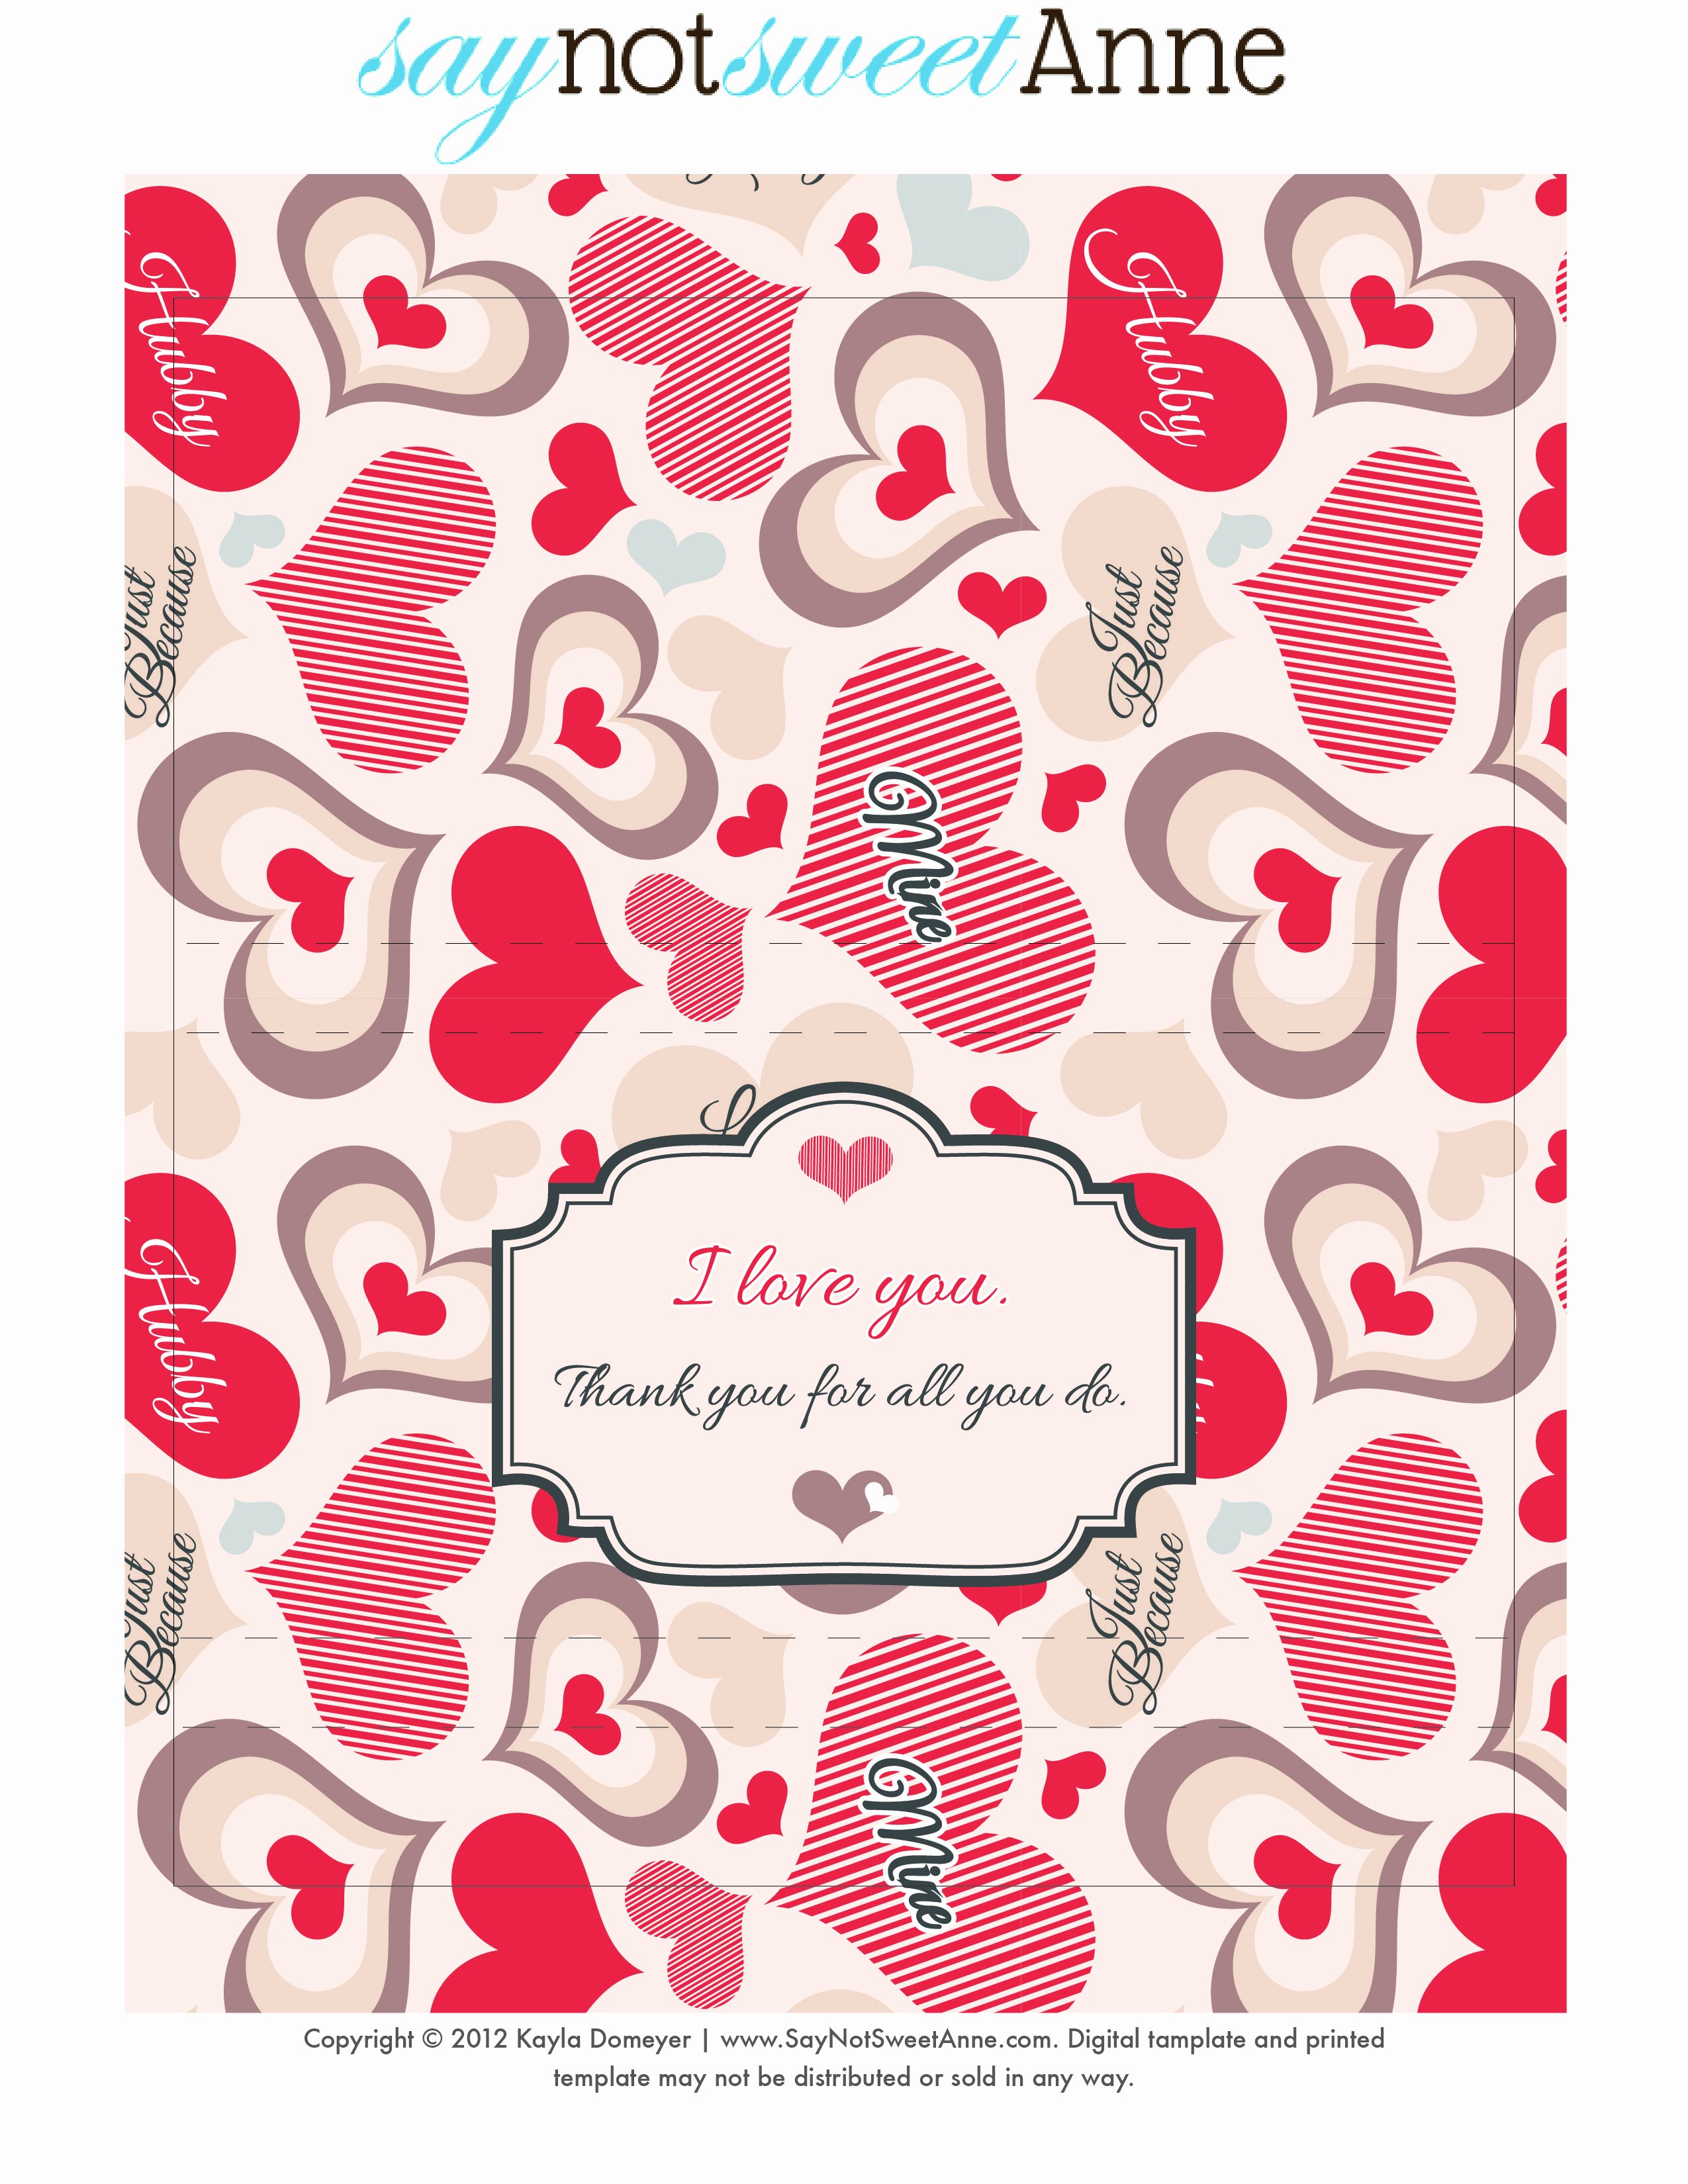 Free Candy Wrappers Template Elegant Just because Candy [free Printable] Sweet Anne Designs